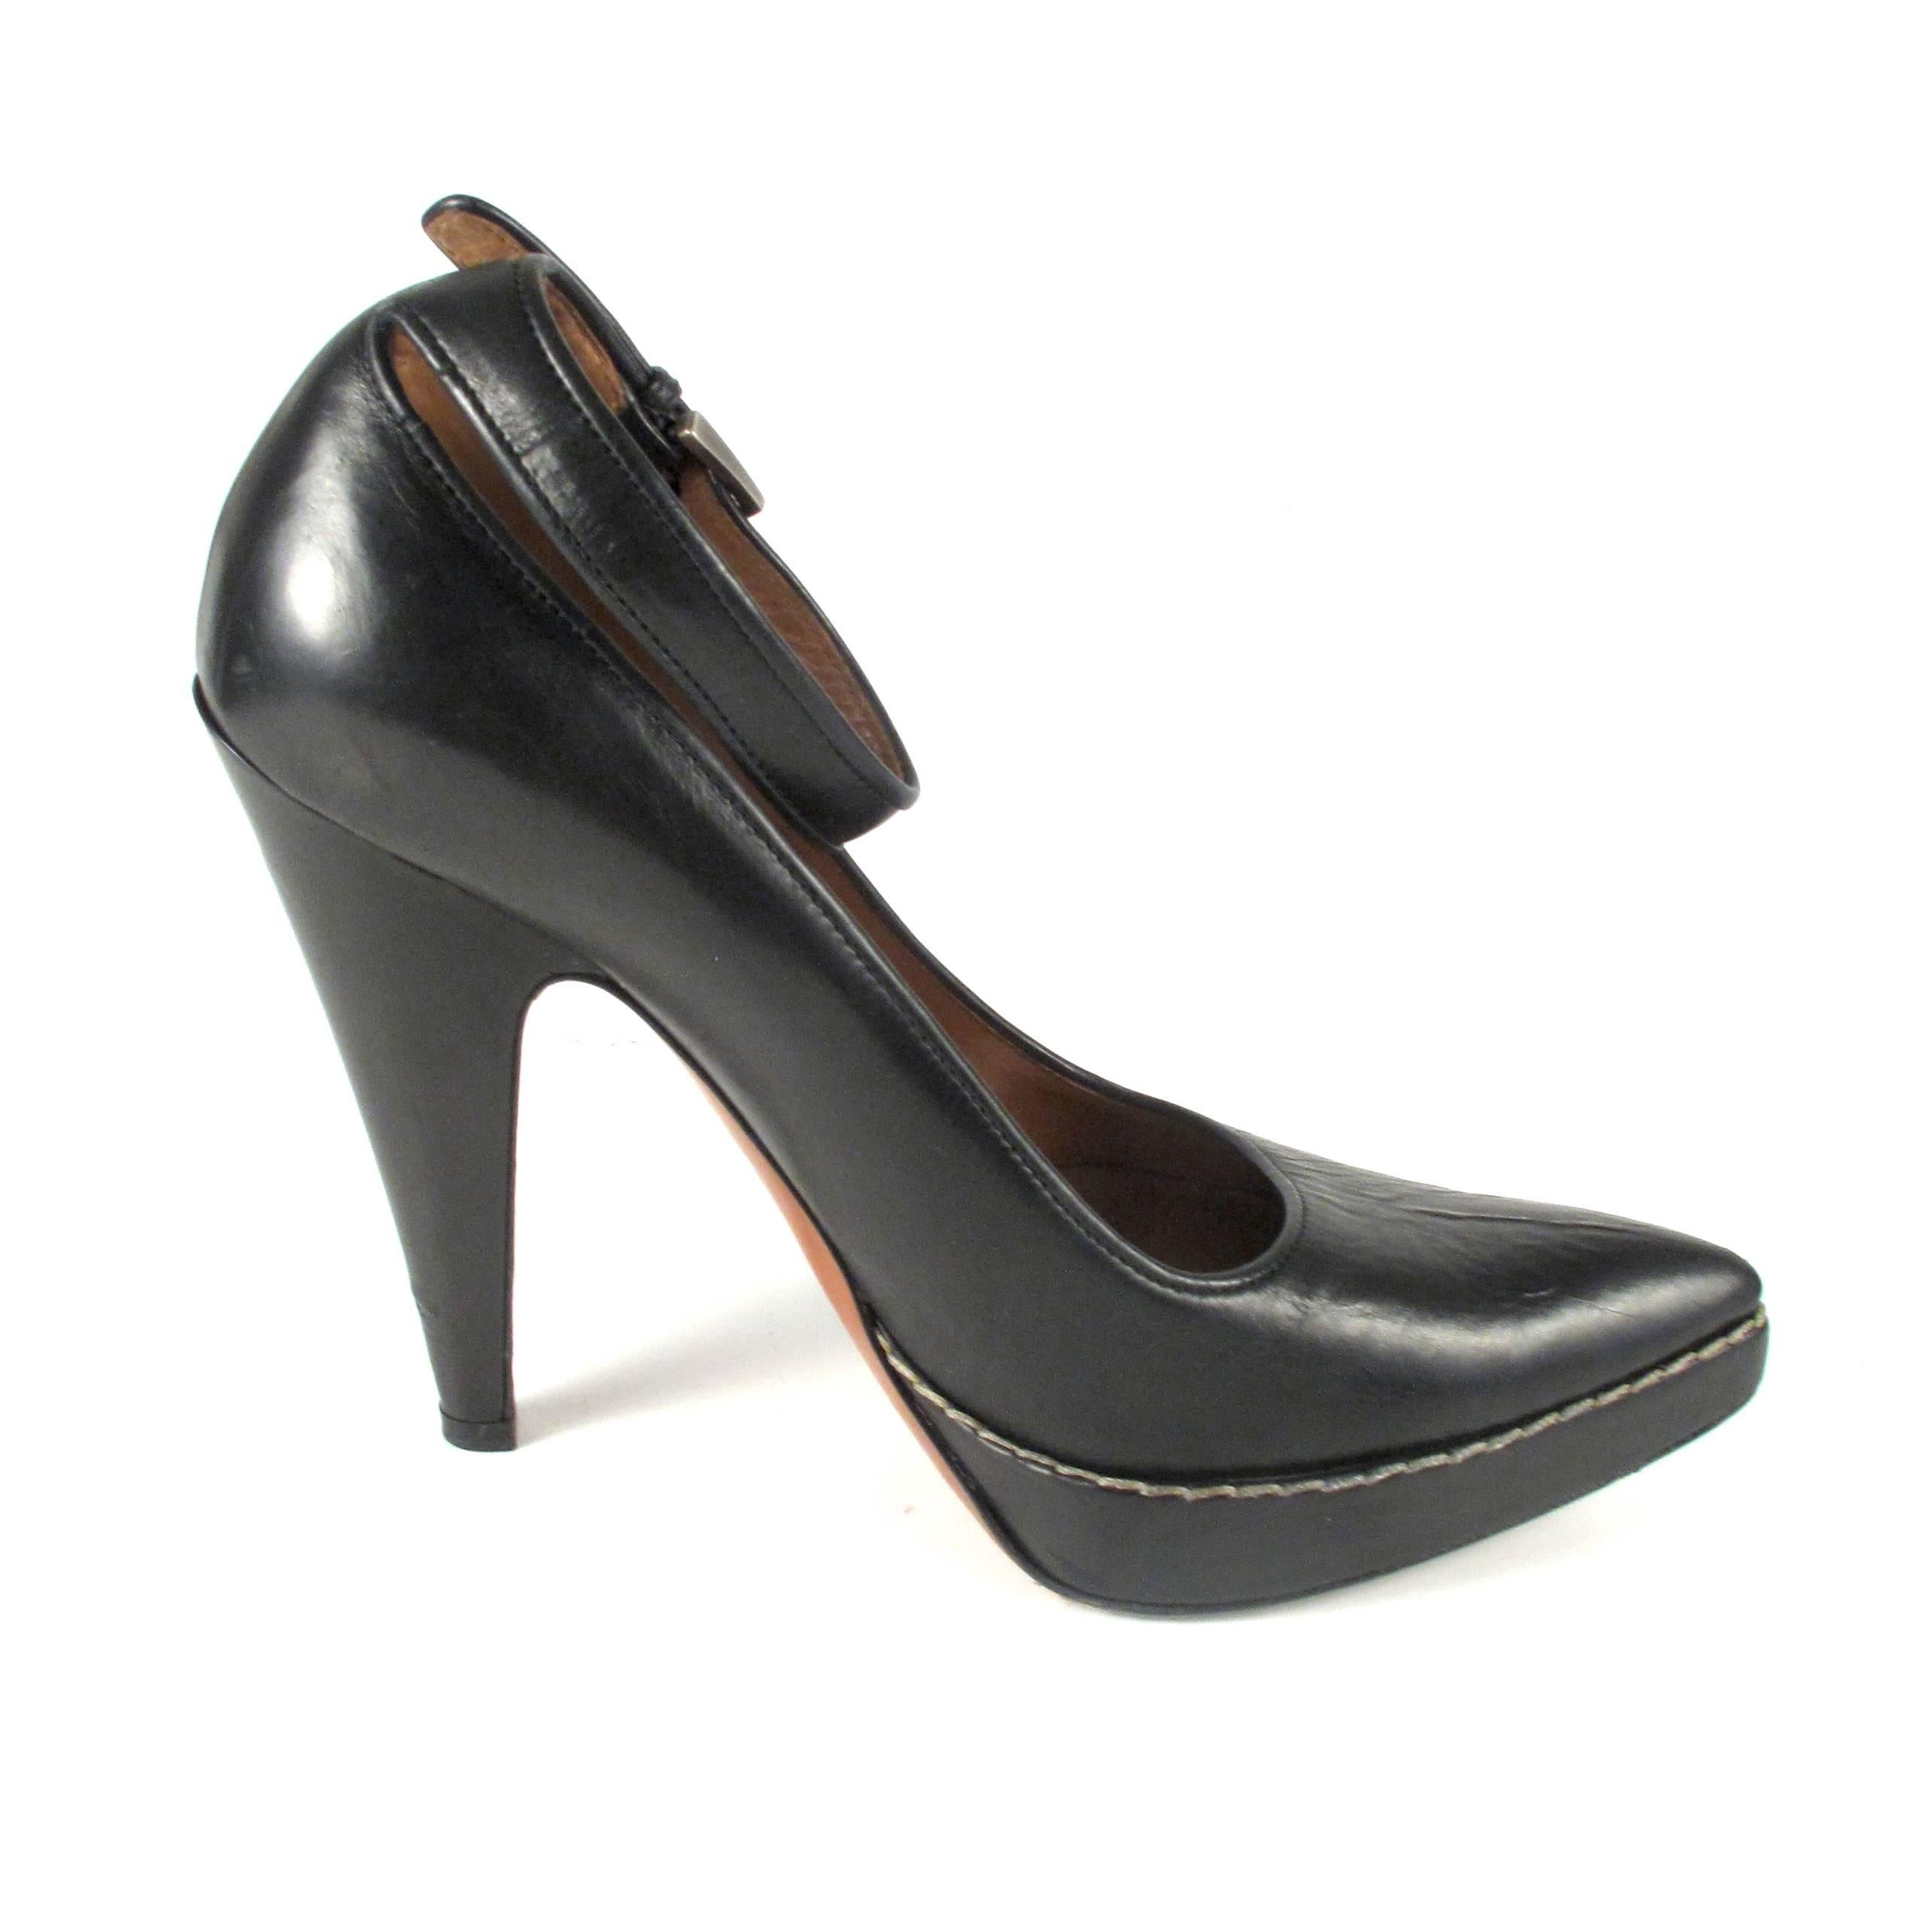 Alaia Heels - US 5.5 - 35.5 - Black Ankle Strap Pumps Pointed Shoes 5 6 35 36 In Good Condition In Prahran, Victoria